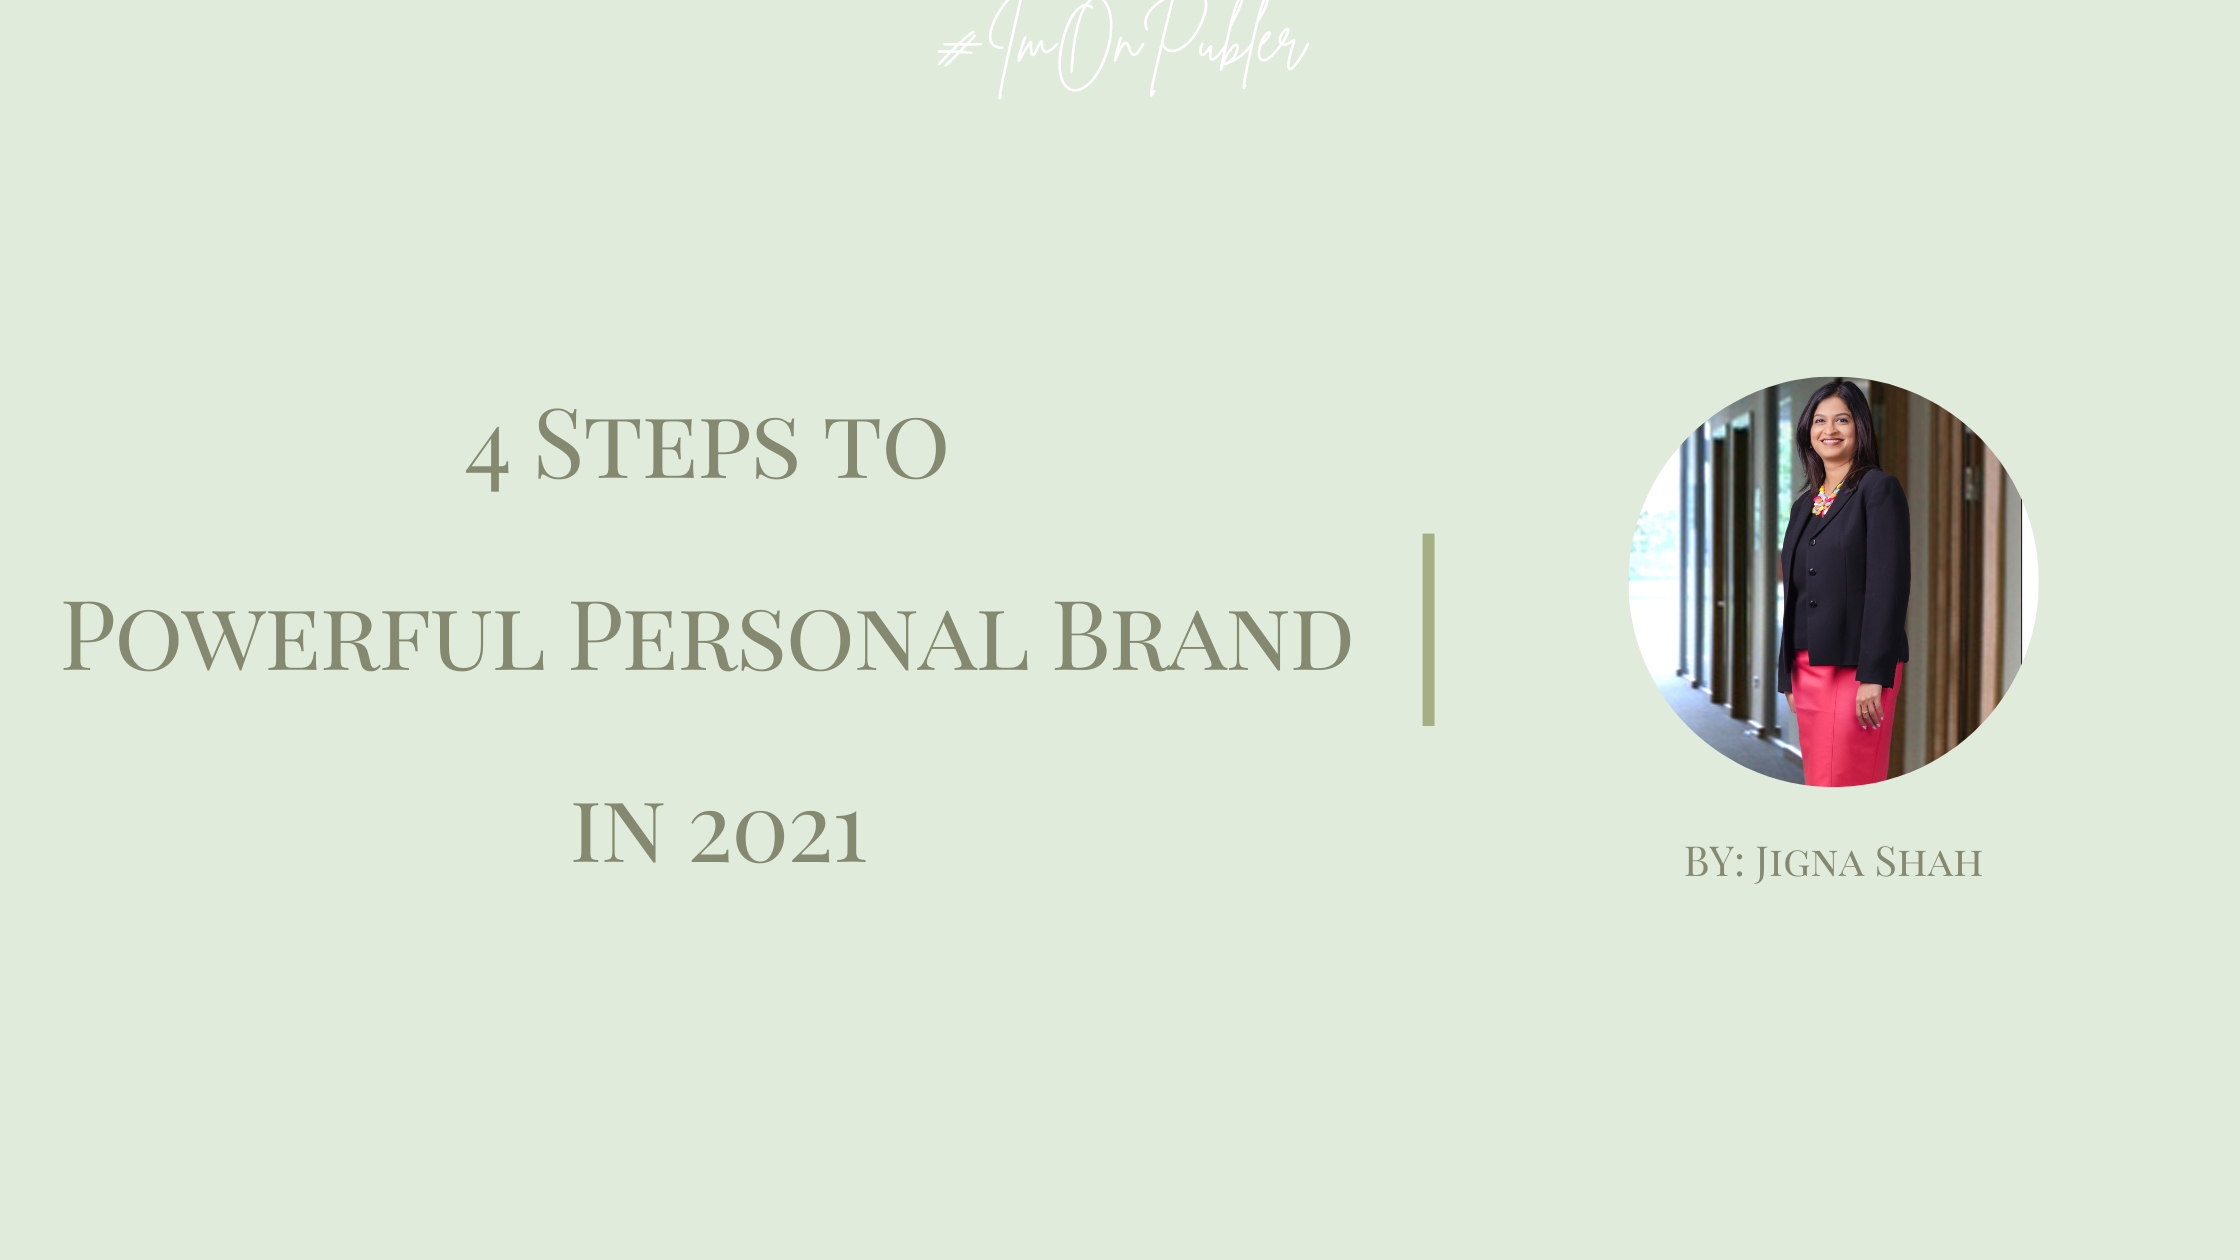 4 Steps to Powerful Personal Brand in 2021 by Jigna Shah